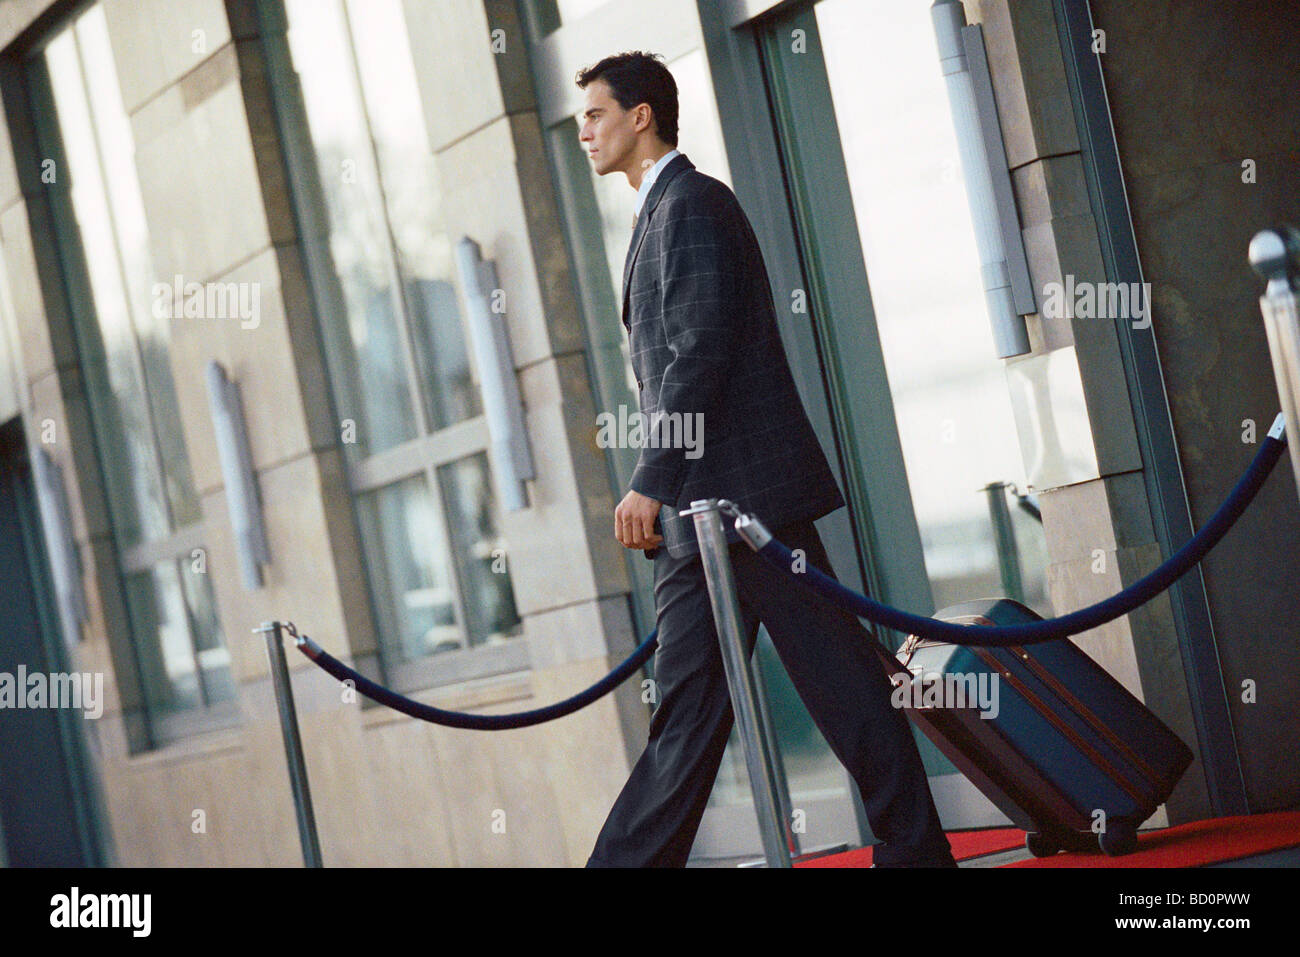 Businessman leaving hotel, pulling suitcase behind him Stock Photo